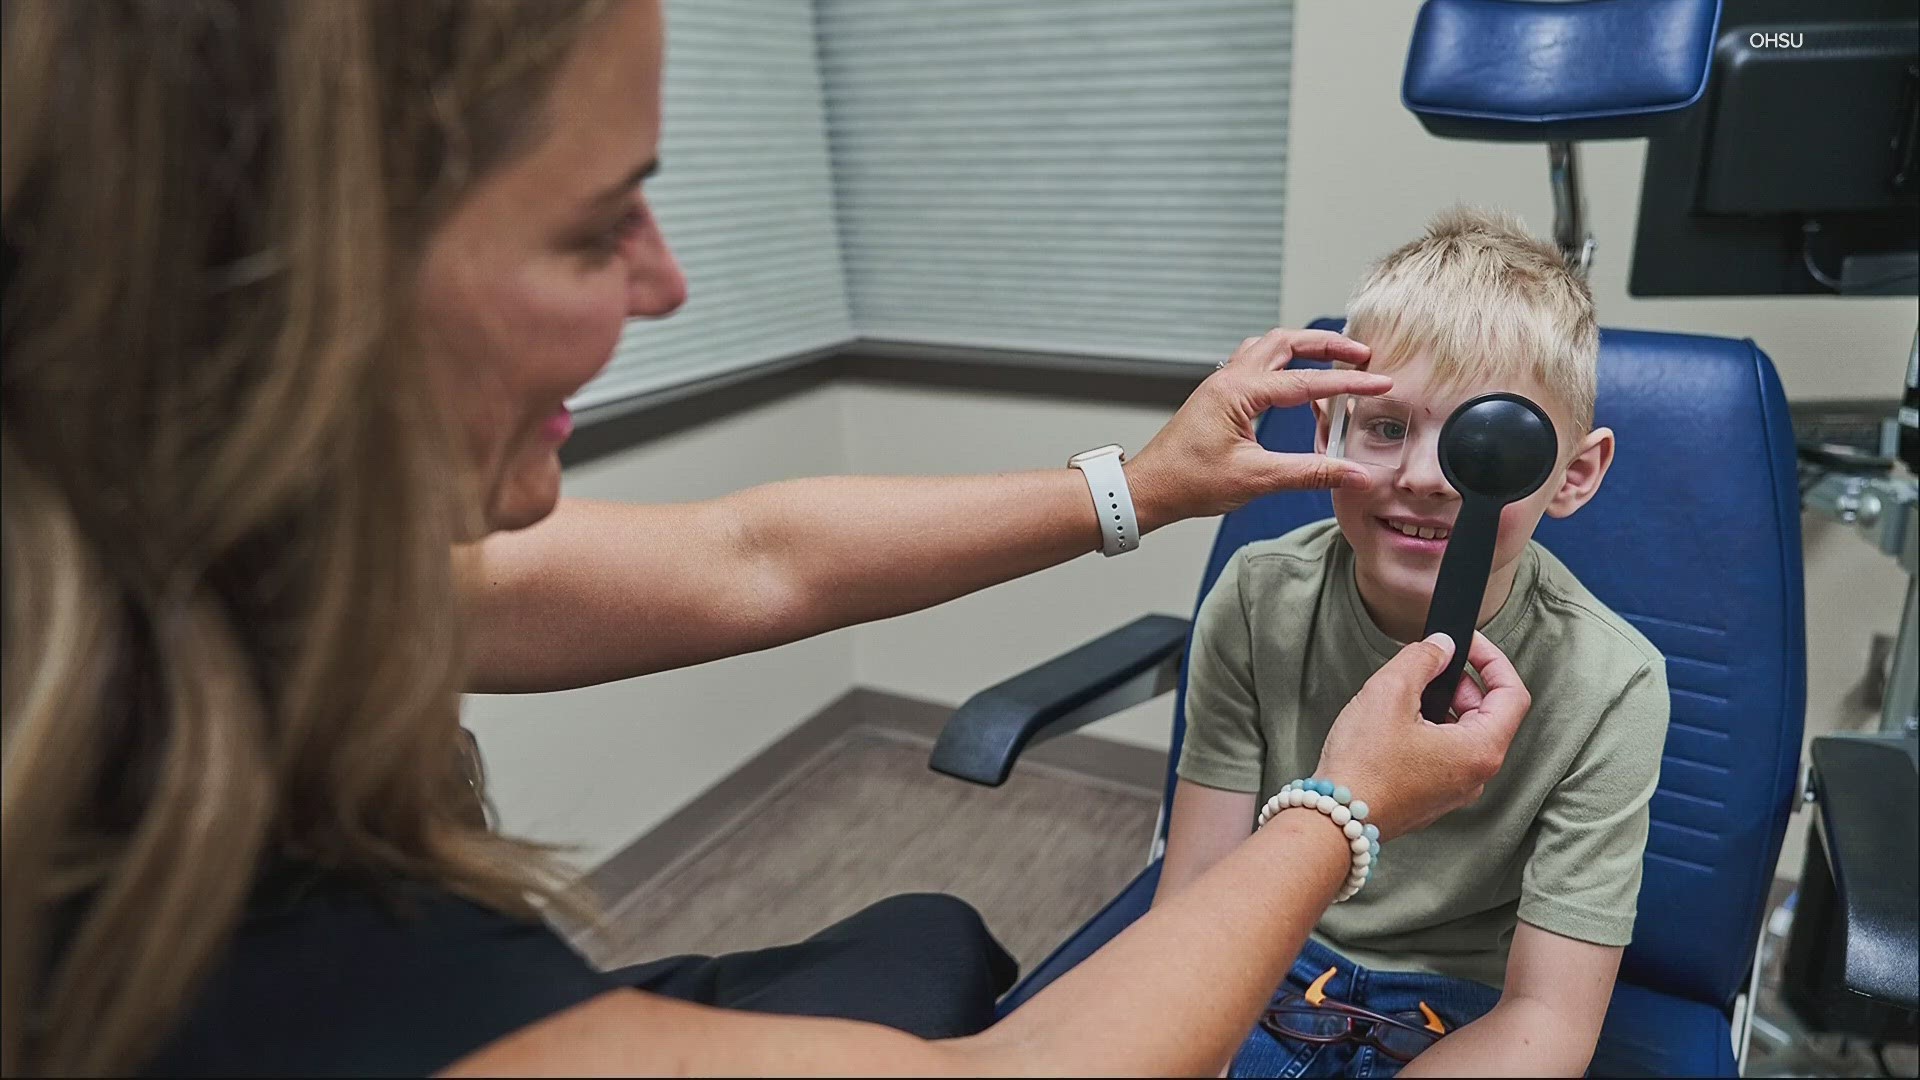 Nearsightedness condition is becoming more common in children, and a current treatment may not be as helpful as doctors thought, a new OHSU study shows.